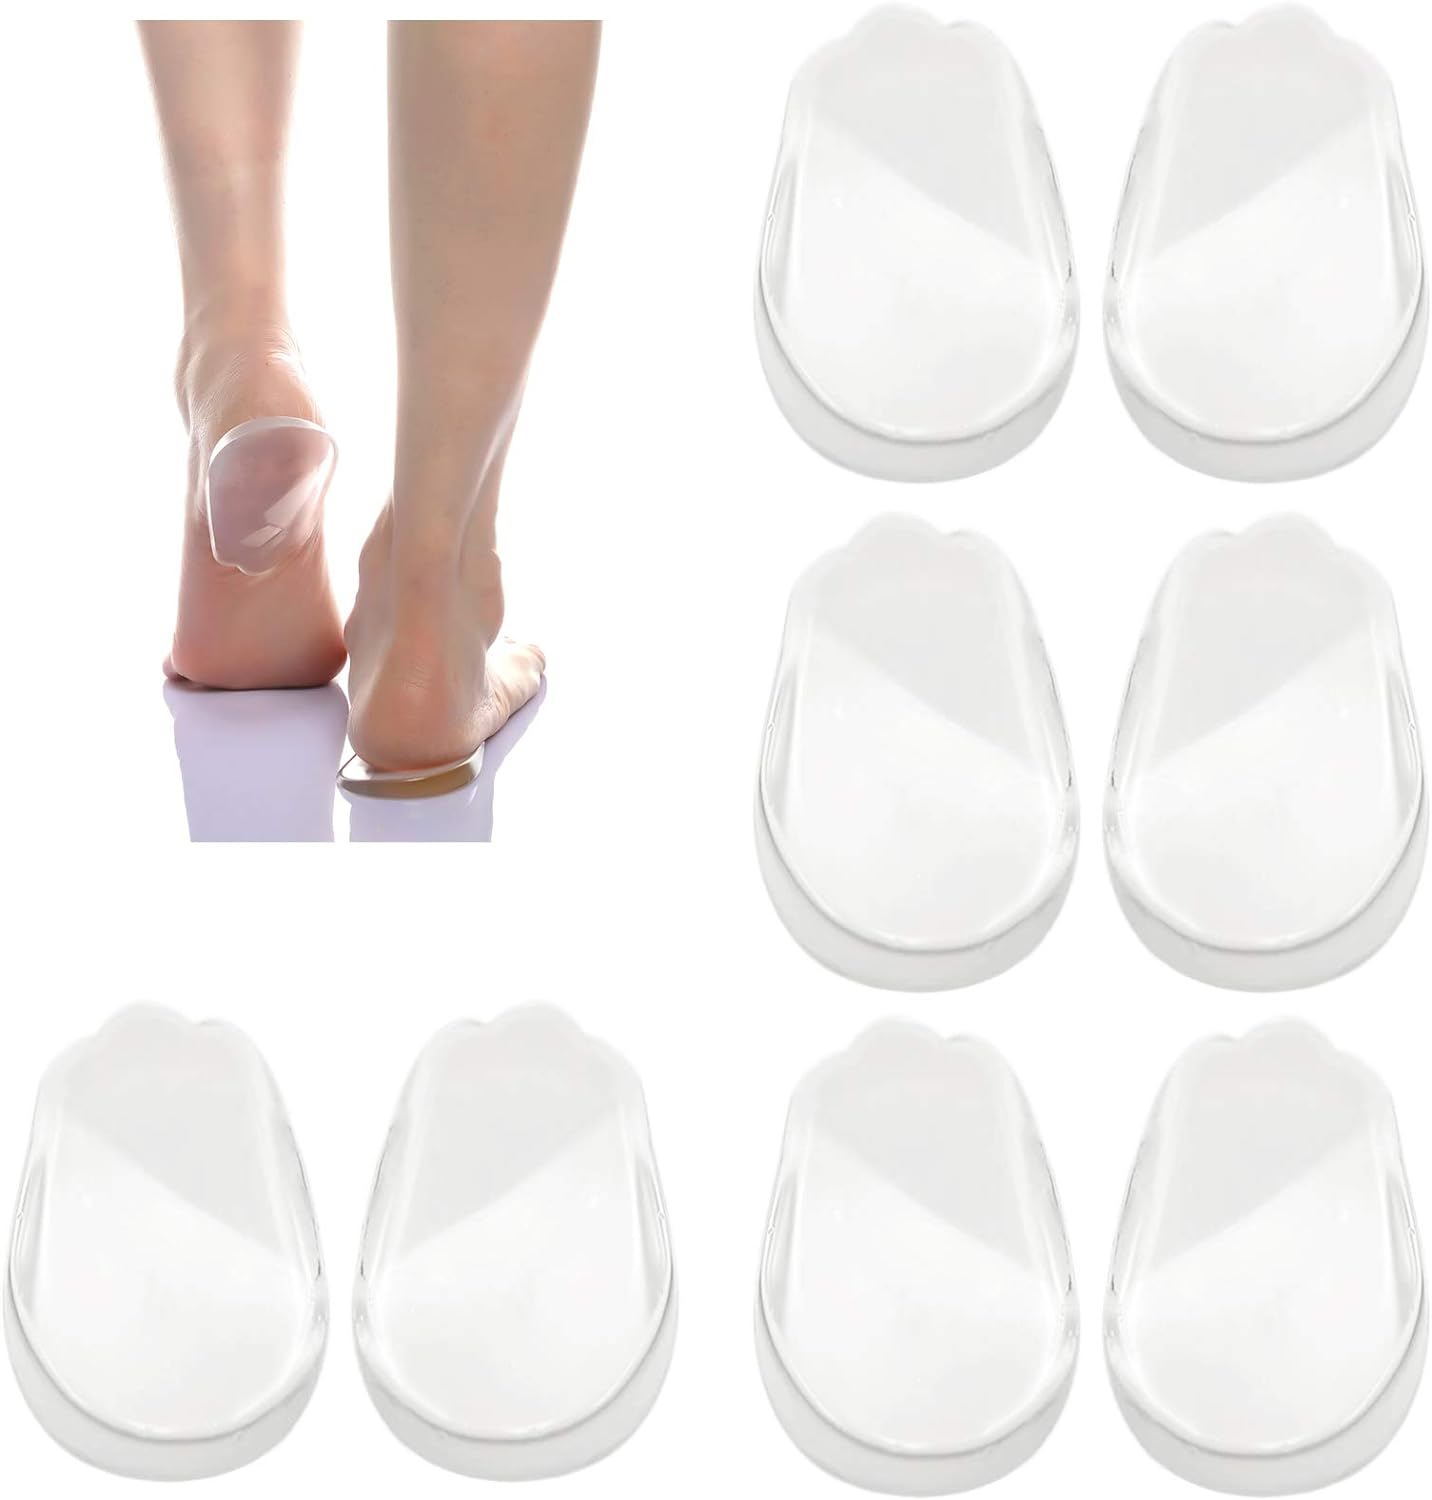 4 Pairs Orthopedic Insoles for Men and Women, Medial Lateral Heel Wedge Silicone Shoe Inserts, Height Increase Shoe Pad for Corrective Pronation, Supination, O/X Type Leg Corrective (Transparent)